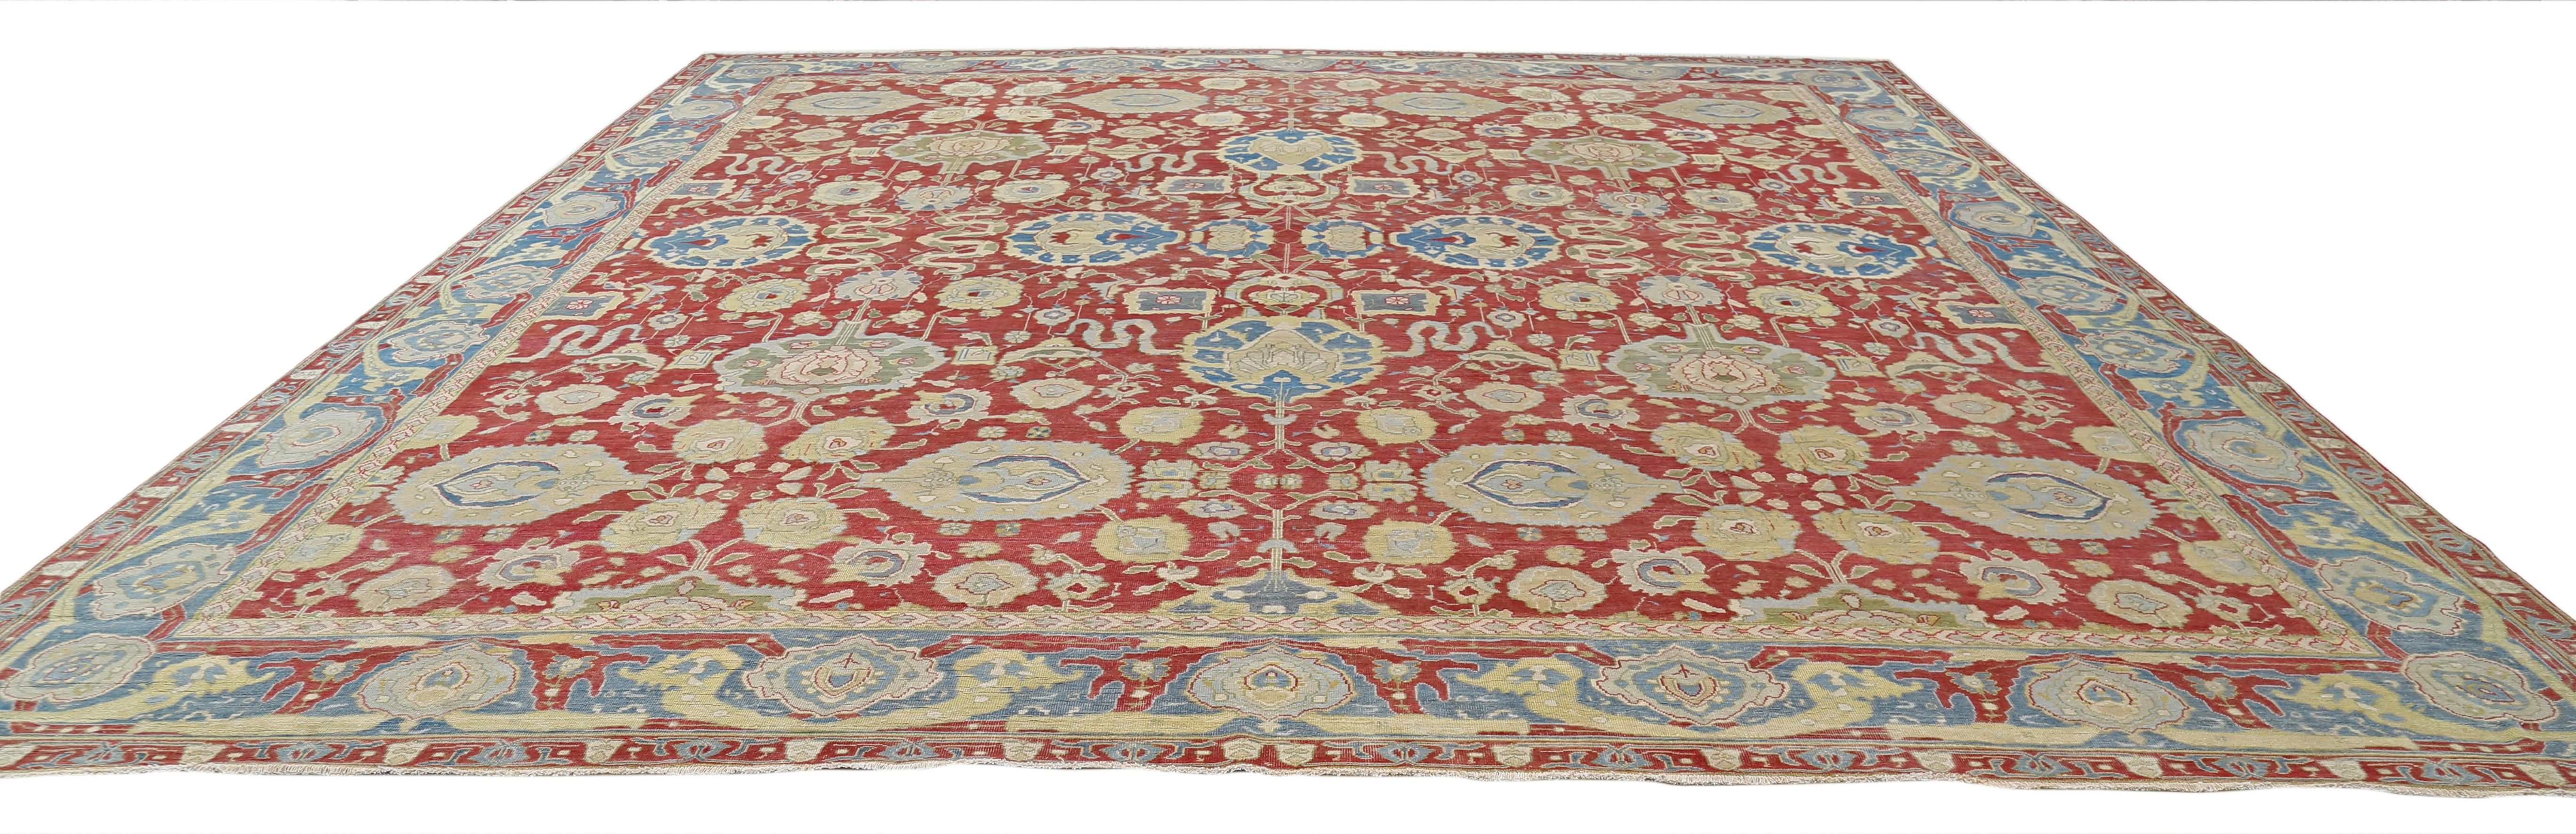 Hand-Woven 20th Century Indian Agra Carpet  For Sale